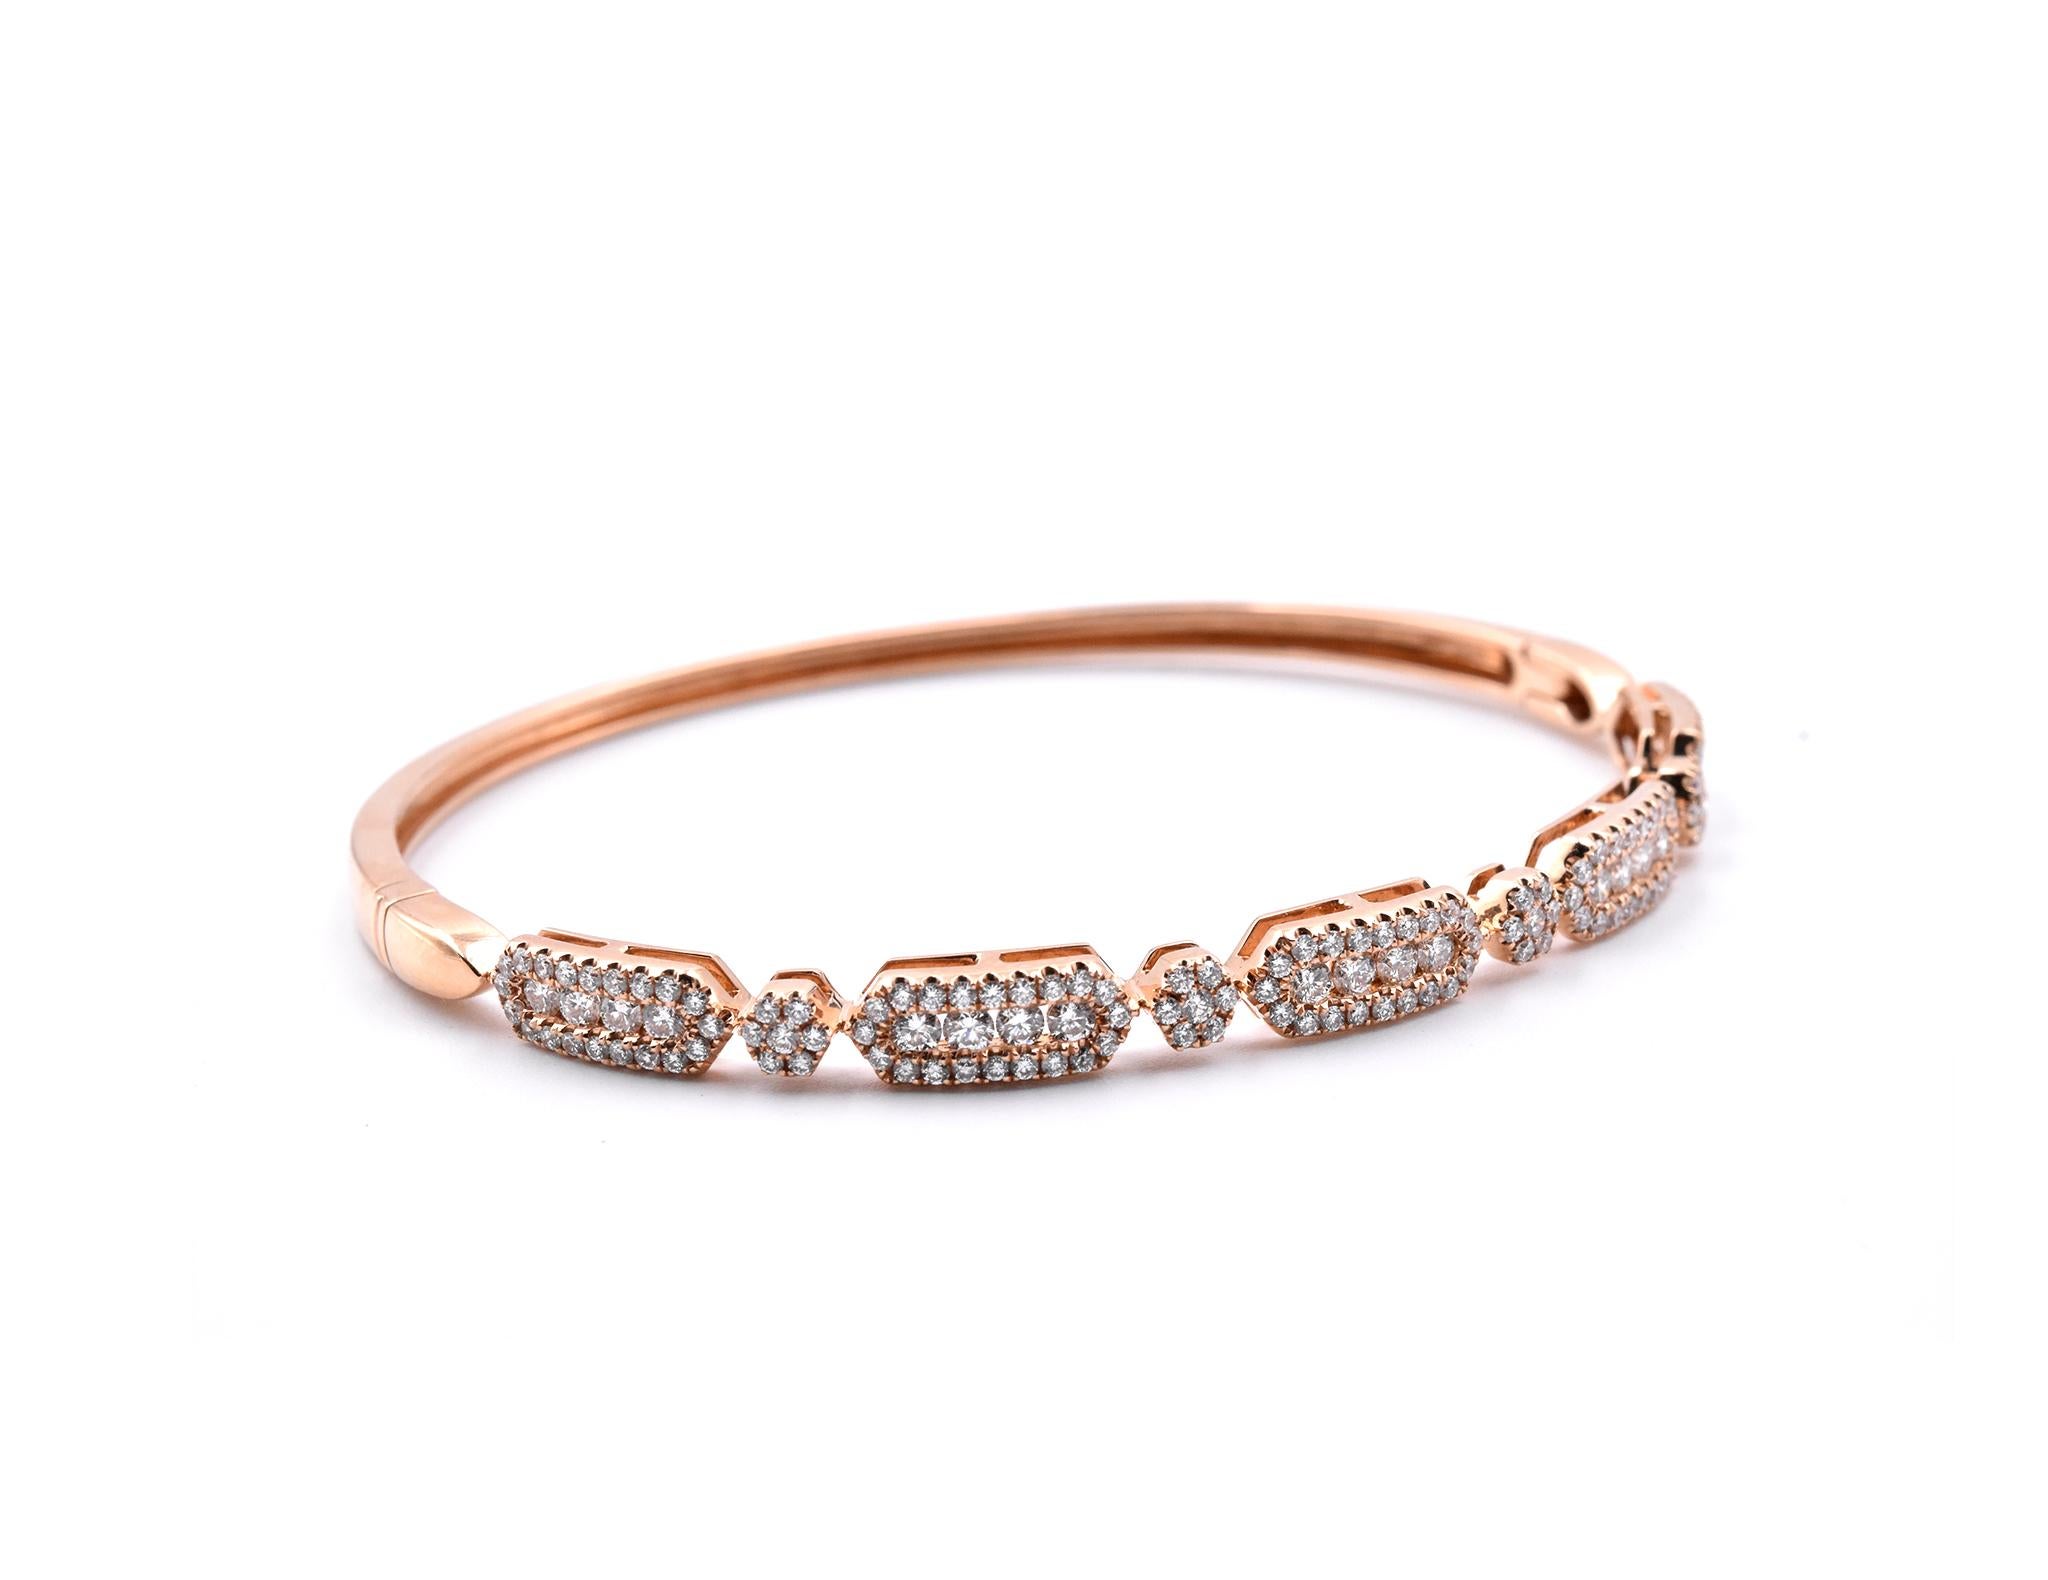 Material: 18k rose gold
Diamonds: 148 round brilliant cuts = 1.66cttw
Color: G
Clarity: VS
Dimensions: bracelet will fit up to a 7-inch wrist
Weight: 13.50 grams
